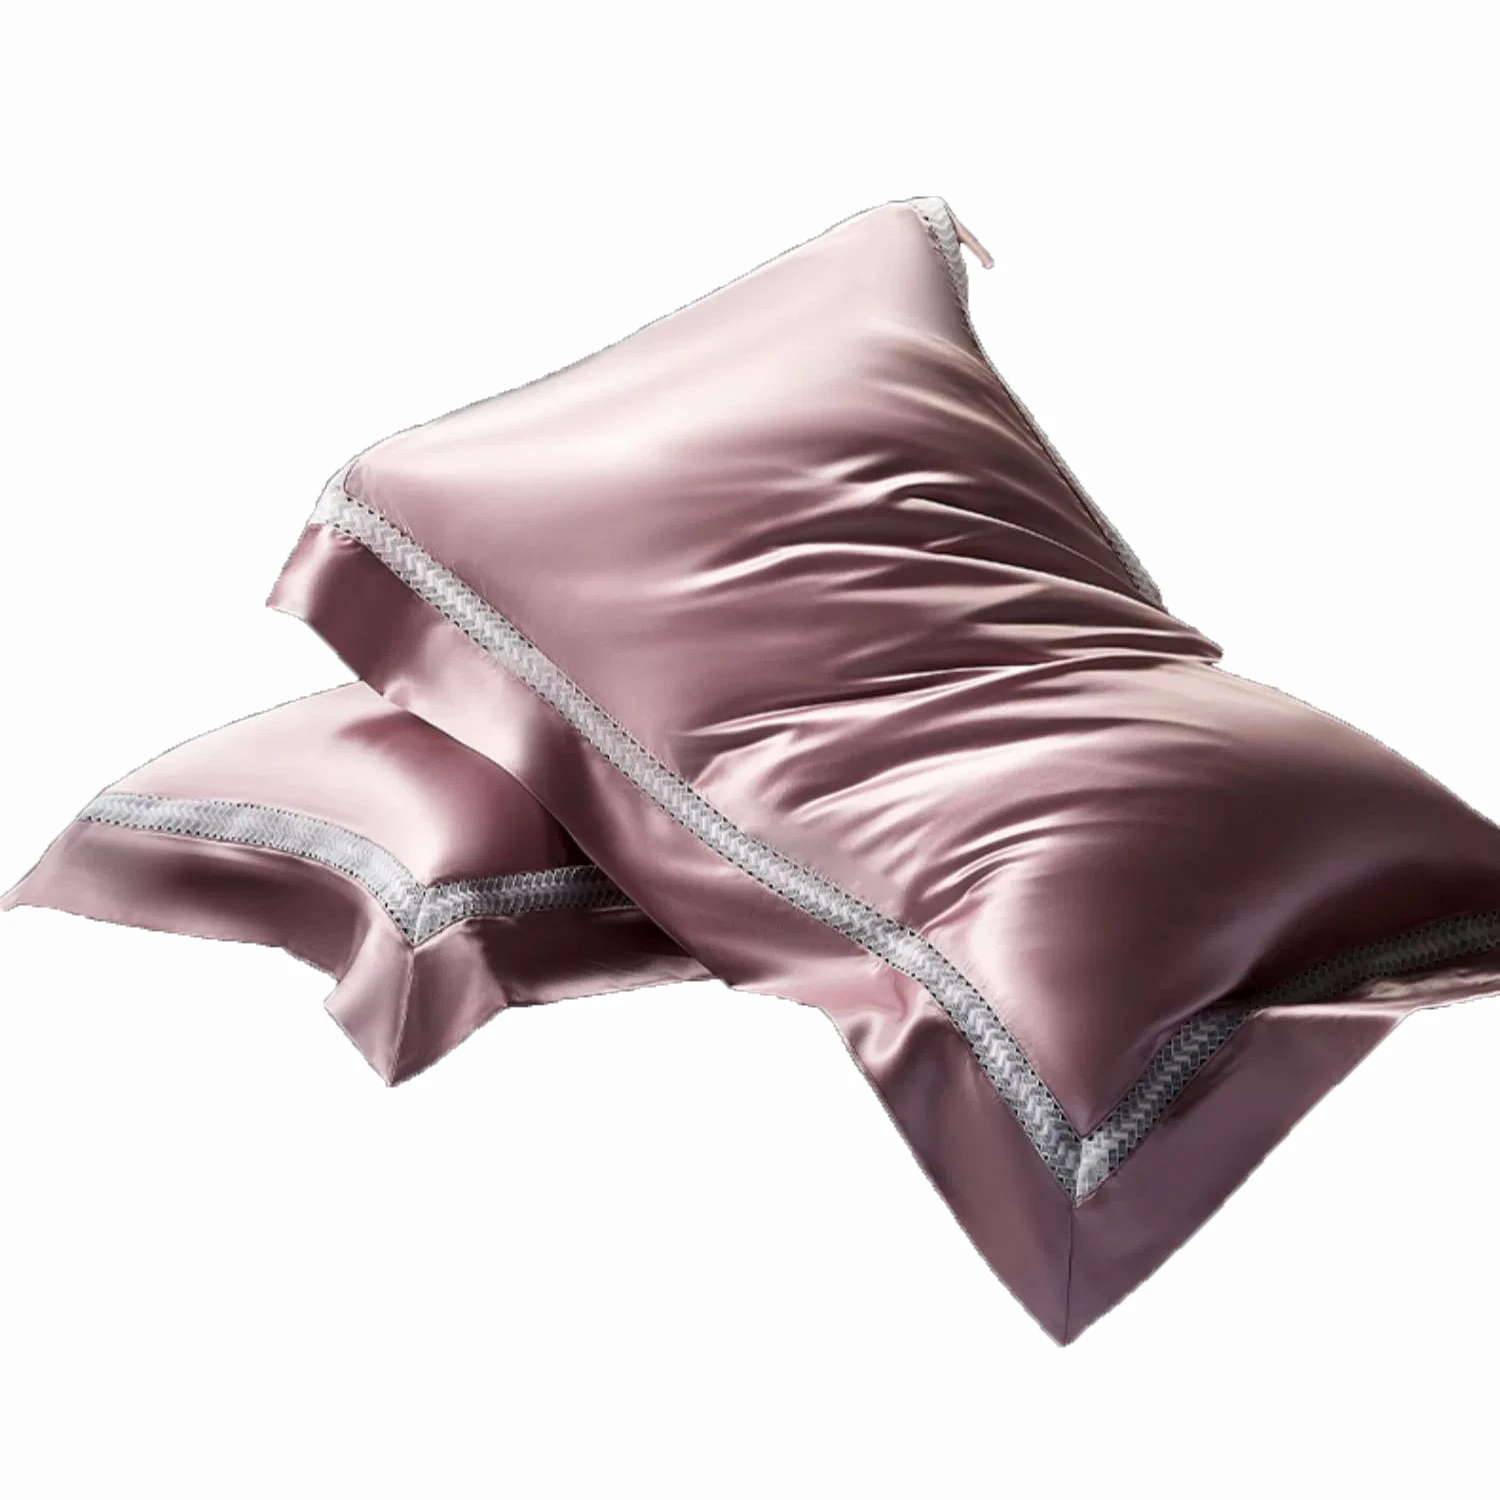 

19mm Silk Composite Pillow with Pillowcase